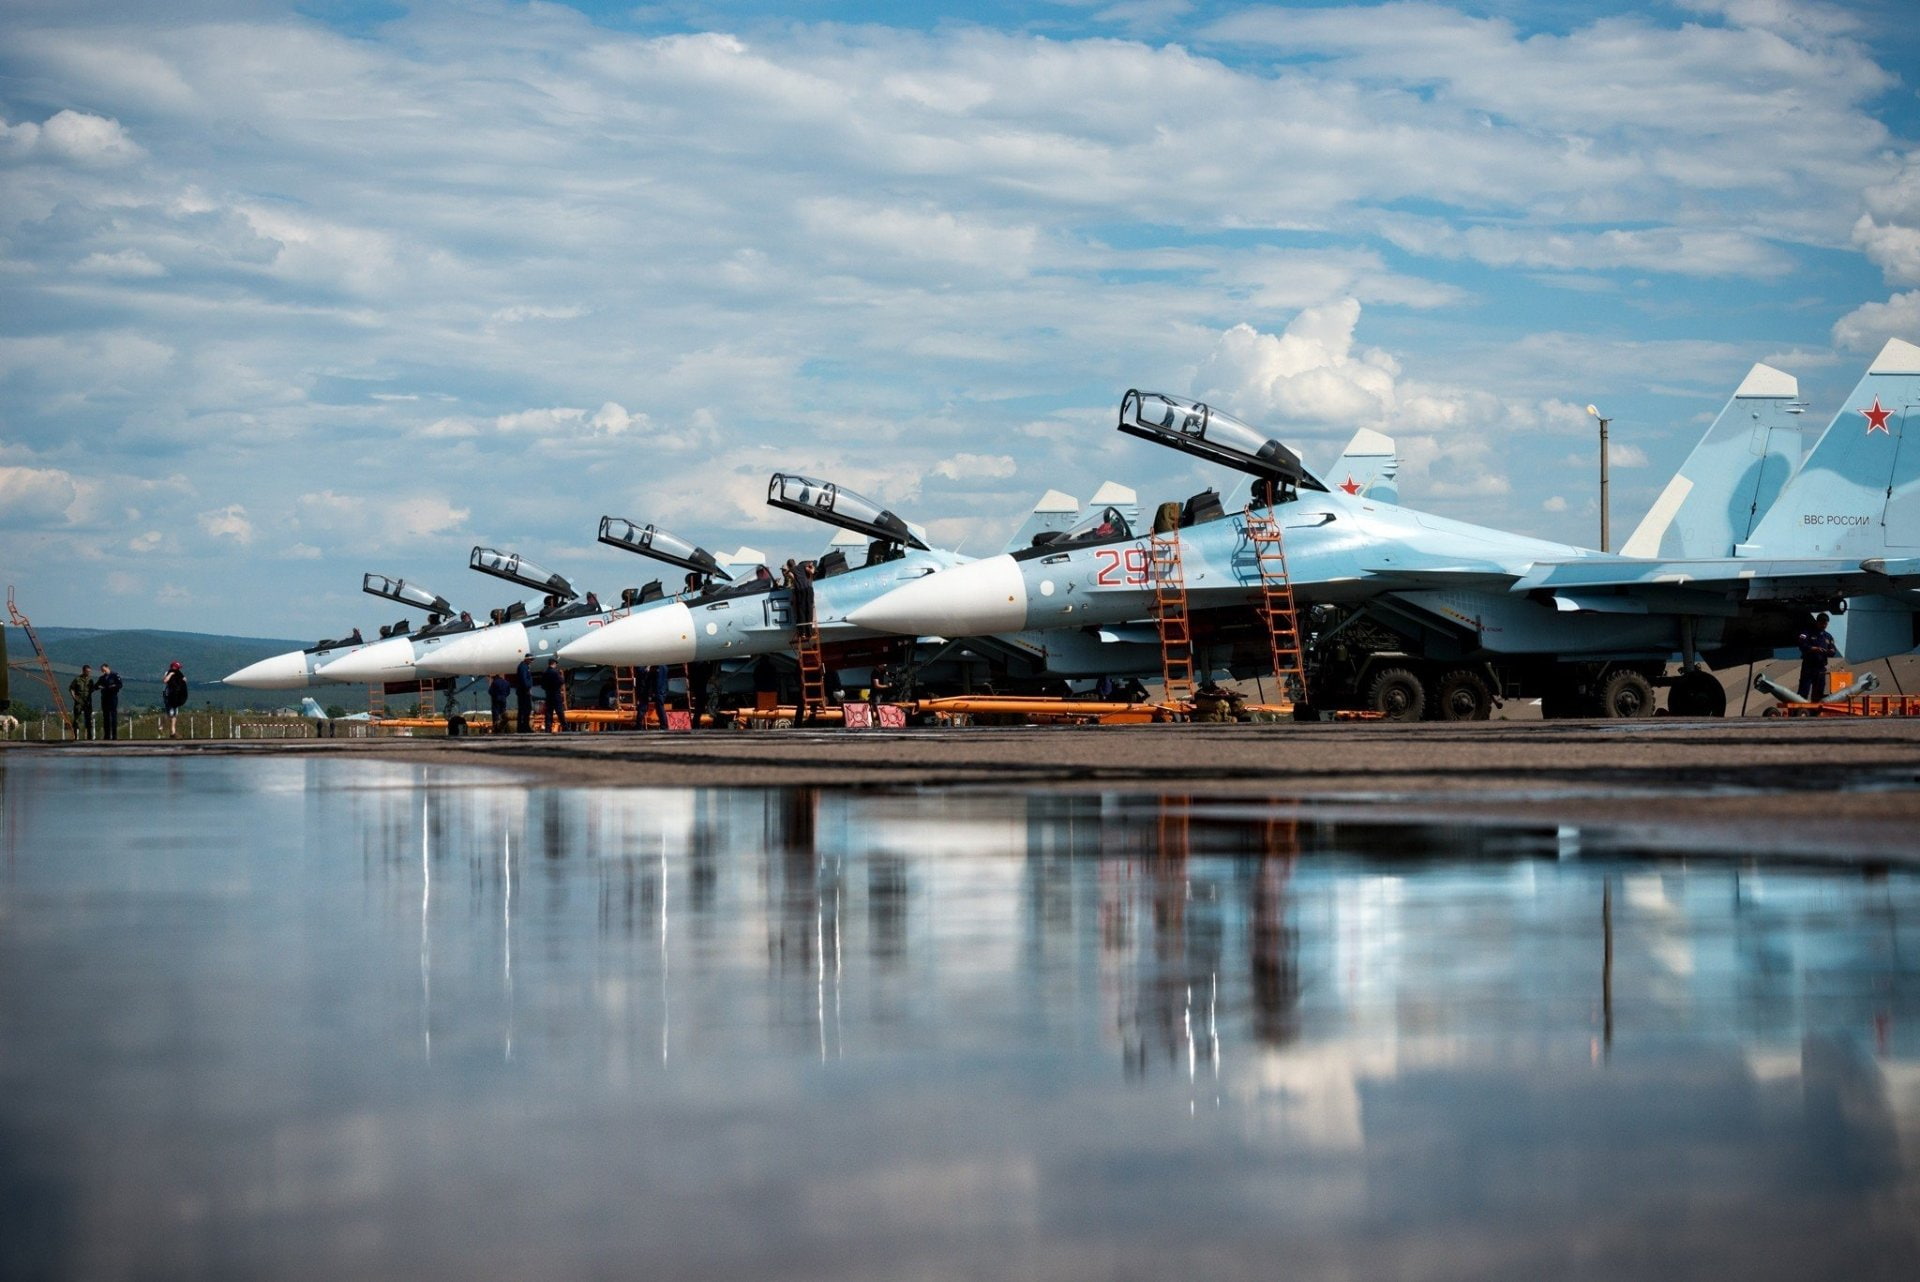 Jet Fighters, Sukhoi Su-35, Aircraft, Military, Reflection